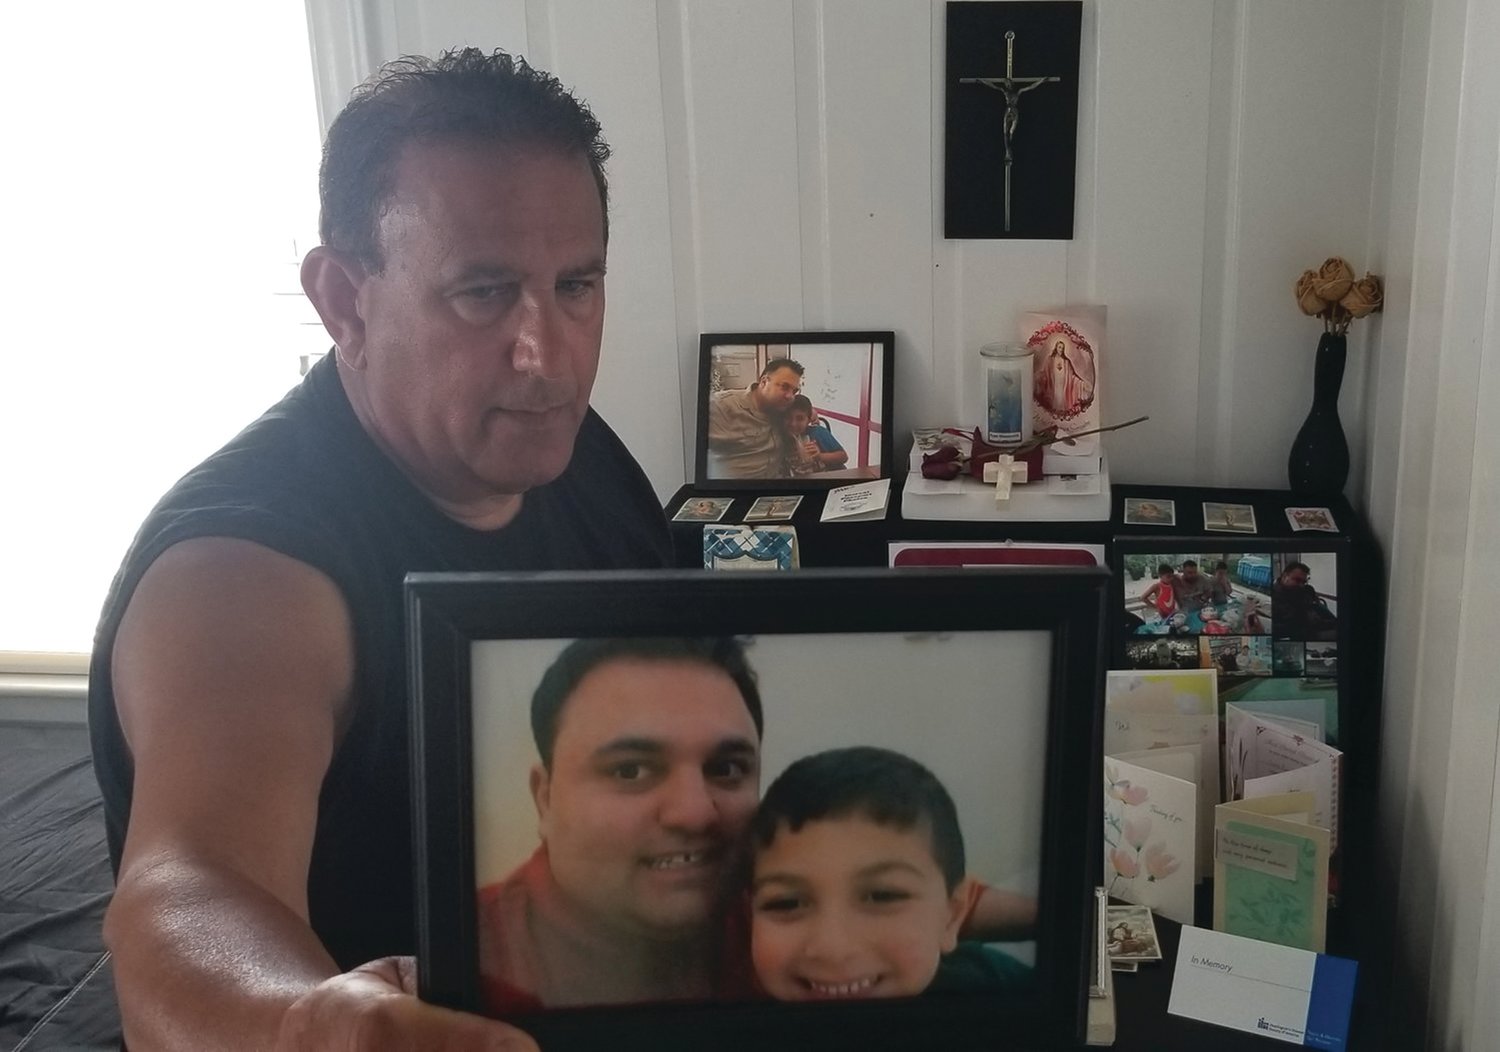 PRODUCTIVE GRIEF: Louis Massemini holds a photo of his son, Louis Ryan Massemini, and grandson Carmen. Ryan died of an overdose in 2019. His father has worked on legislation aimed at preventing similar deaths.